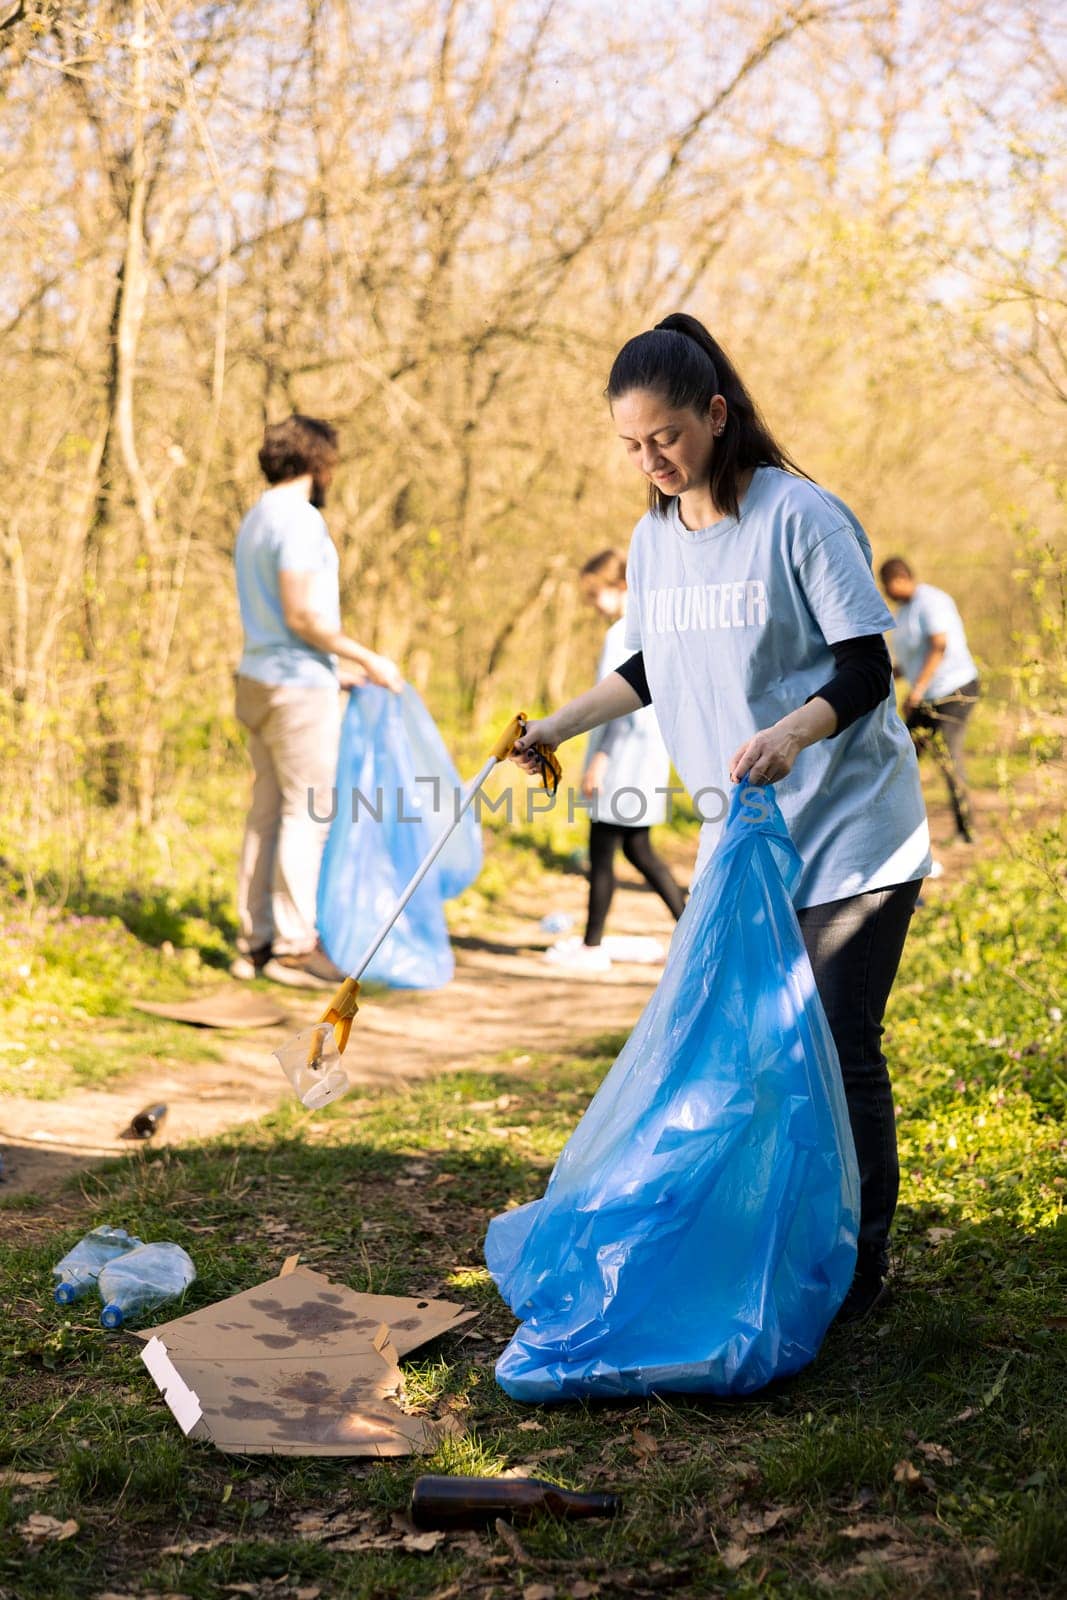 Female volunteer tidying the woodland of garbage and plastic bottles, collecting rubbish with claw and disposal bag. Young activist volunteering to conserve natural ecosystem.